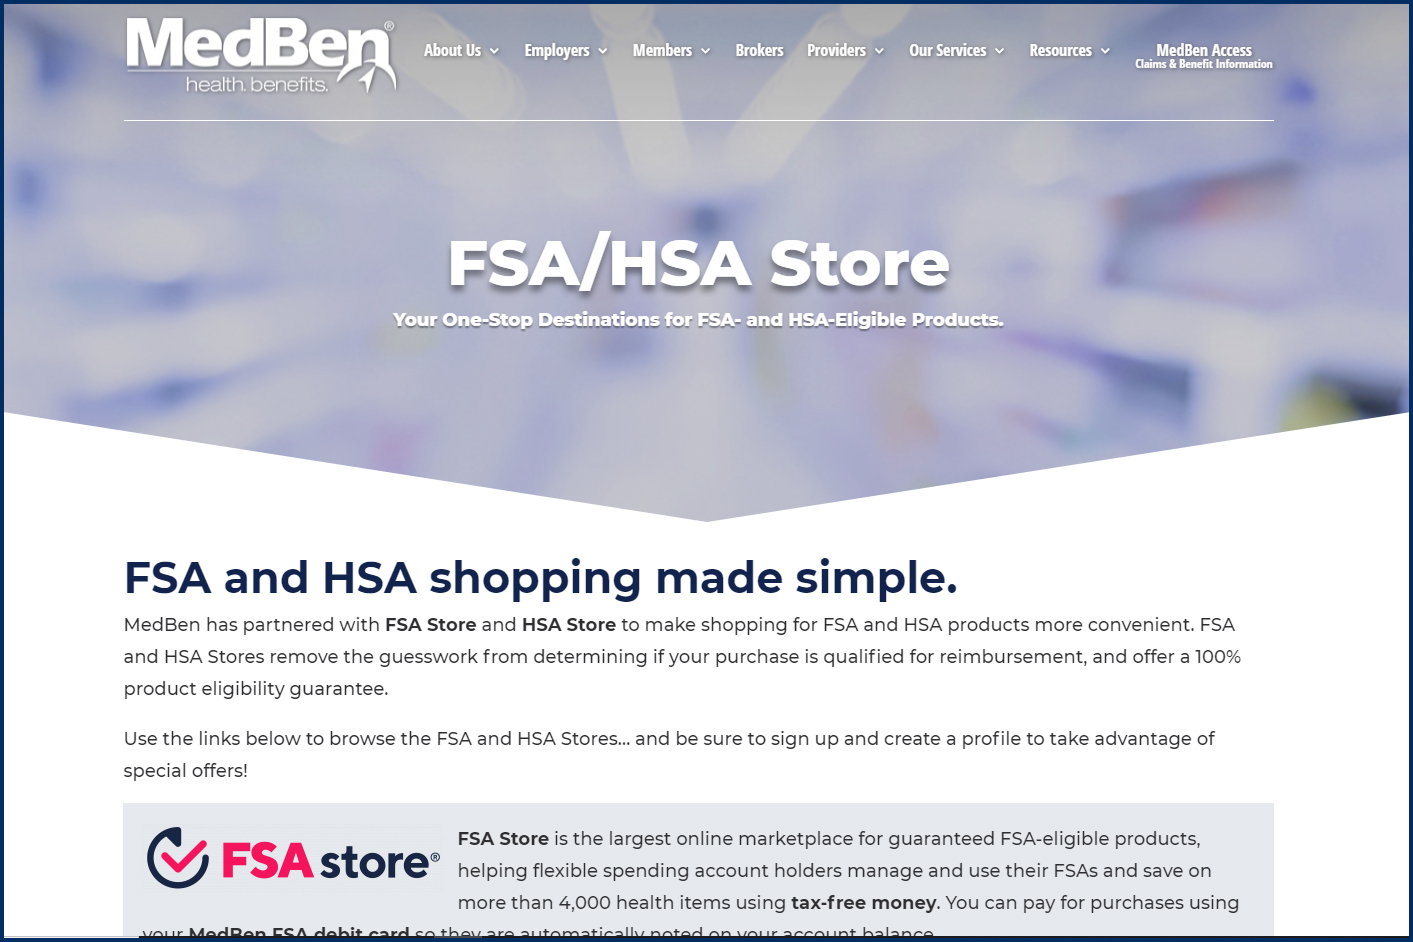 FSA & HSA Stores Now Available to MedBen Members - MedBen